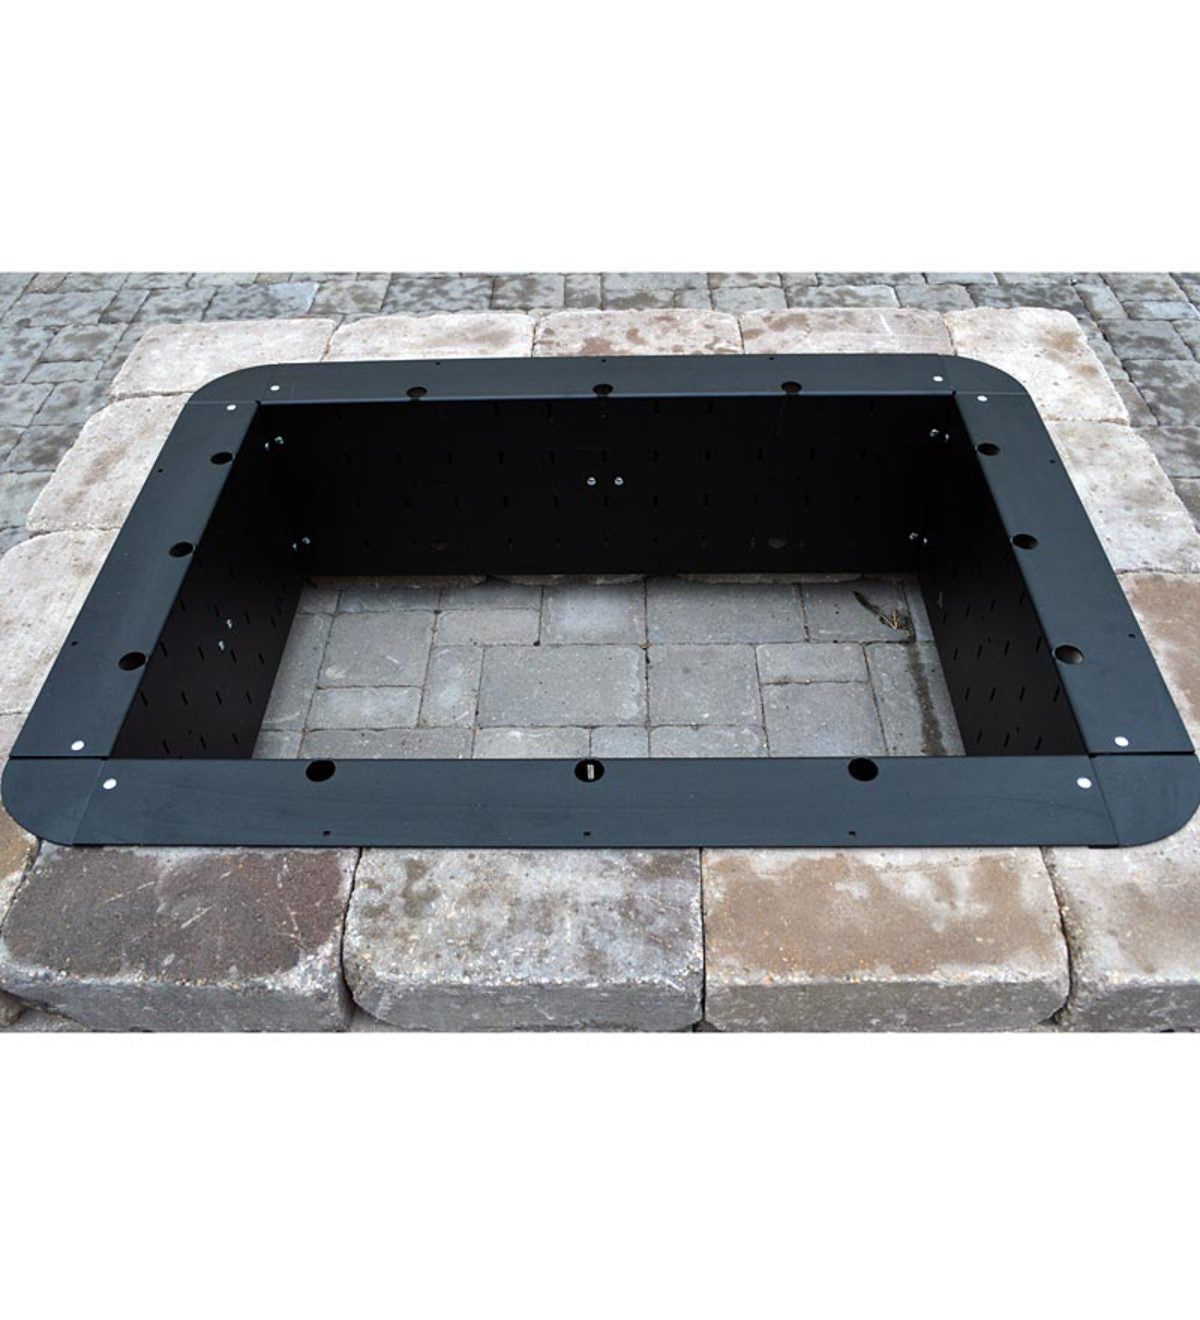 American-Made 24”Square Fire Pit Insert                                                                        American-Made 24”Square Fire Pit Insert                                                                                                                                        Sku:                                    13222